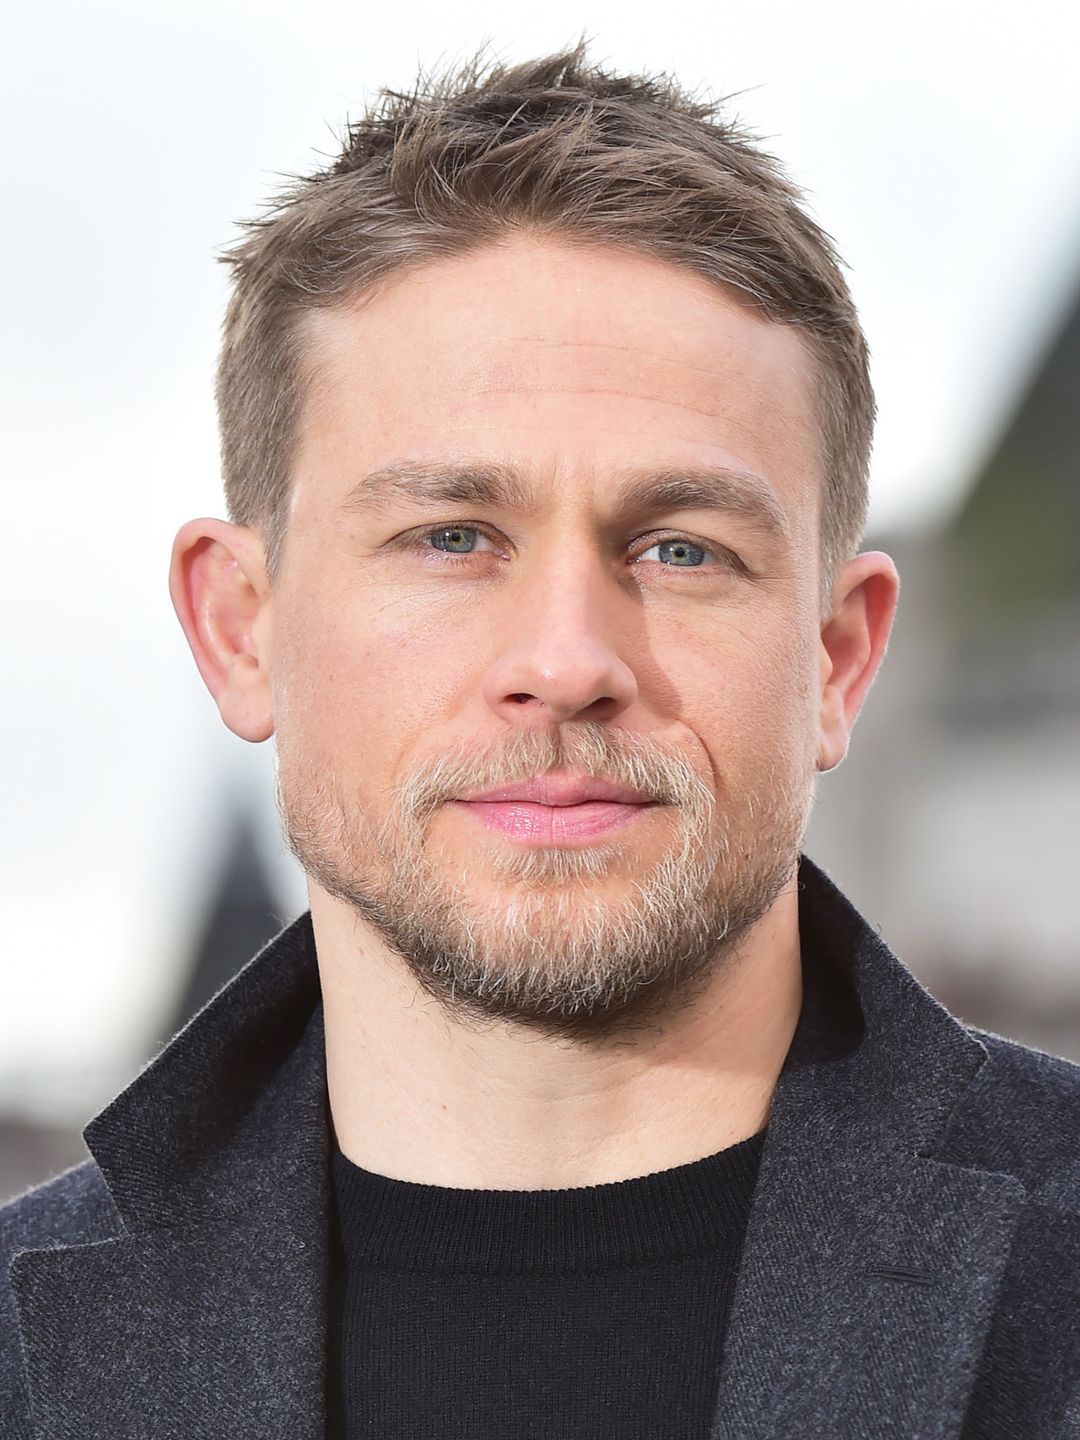 Charlie Hunnam current look